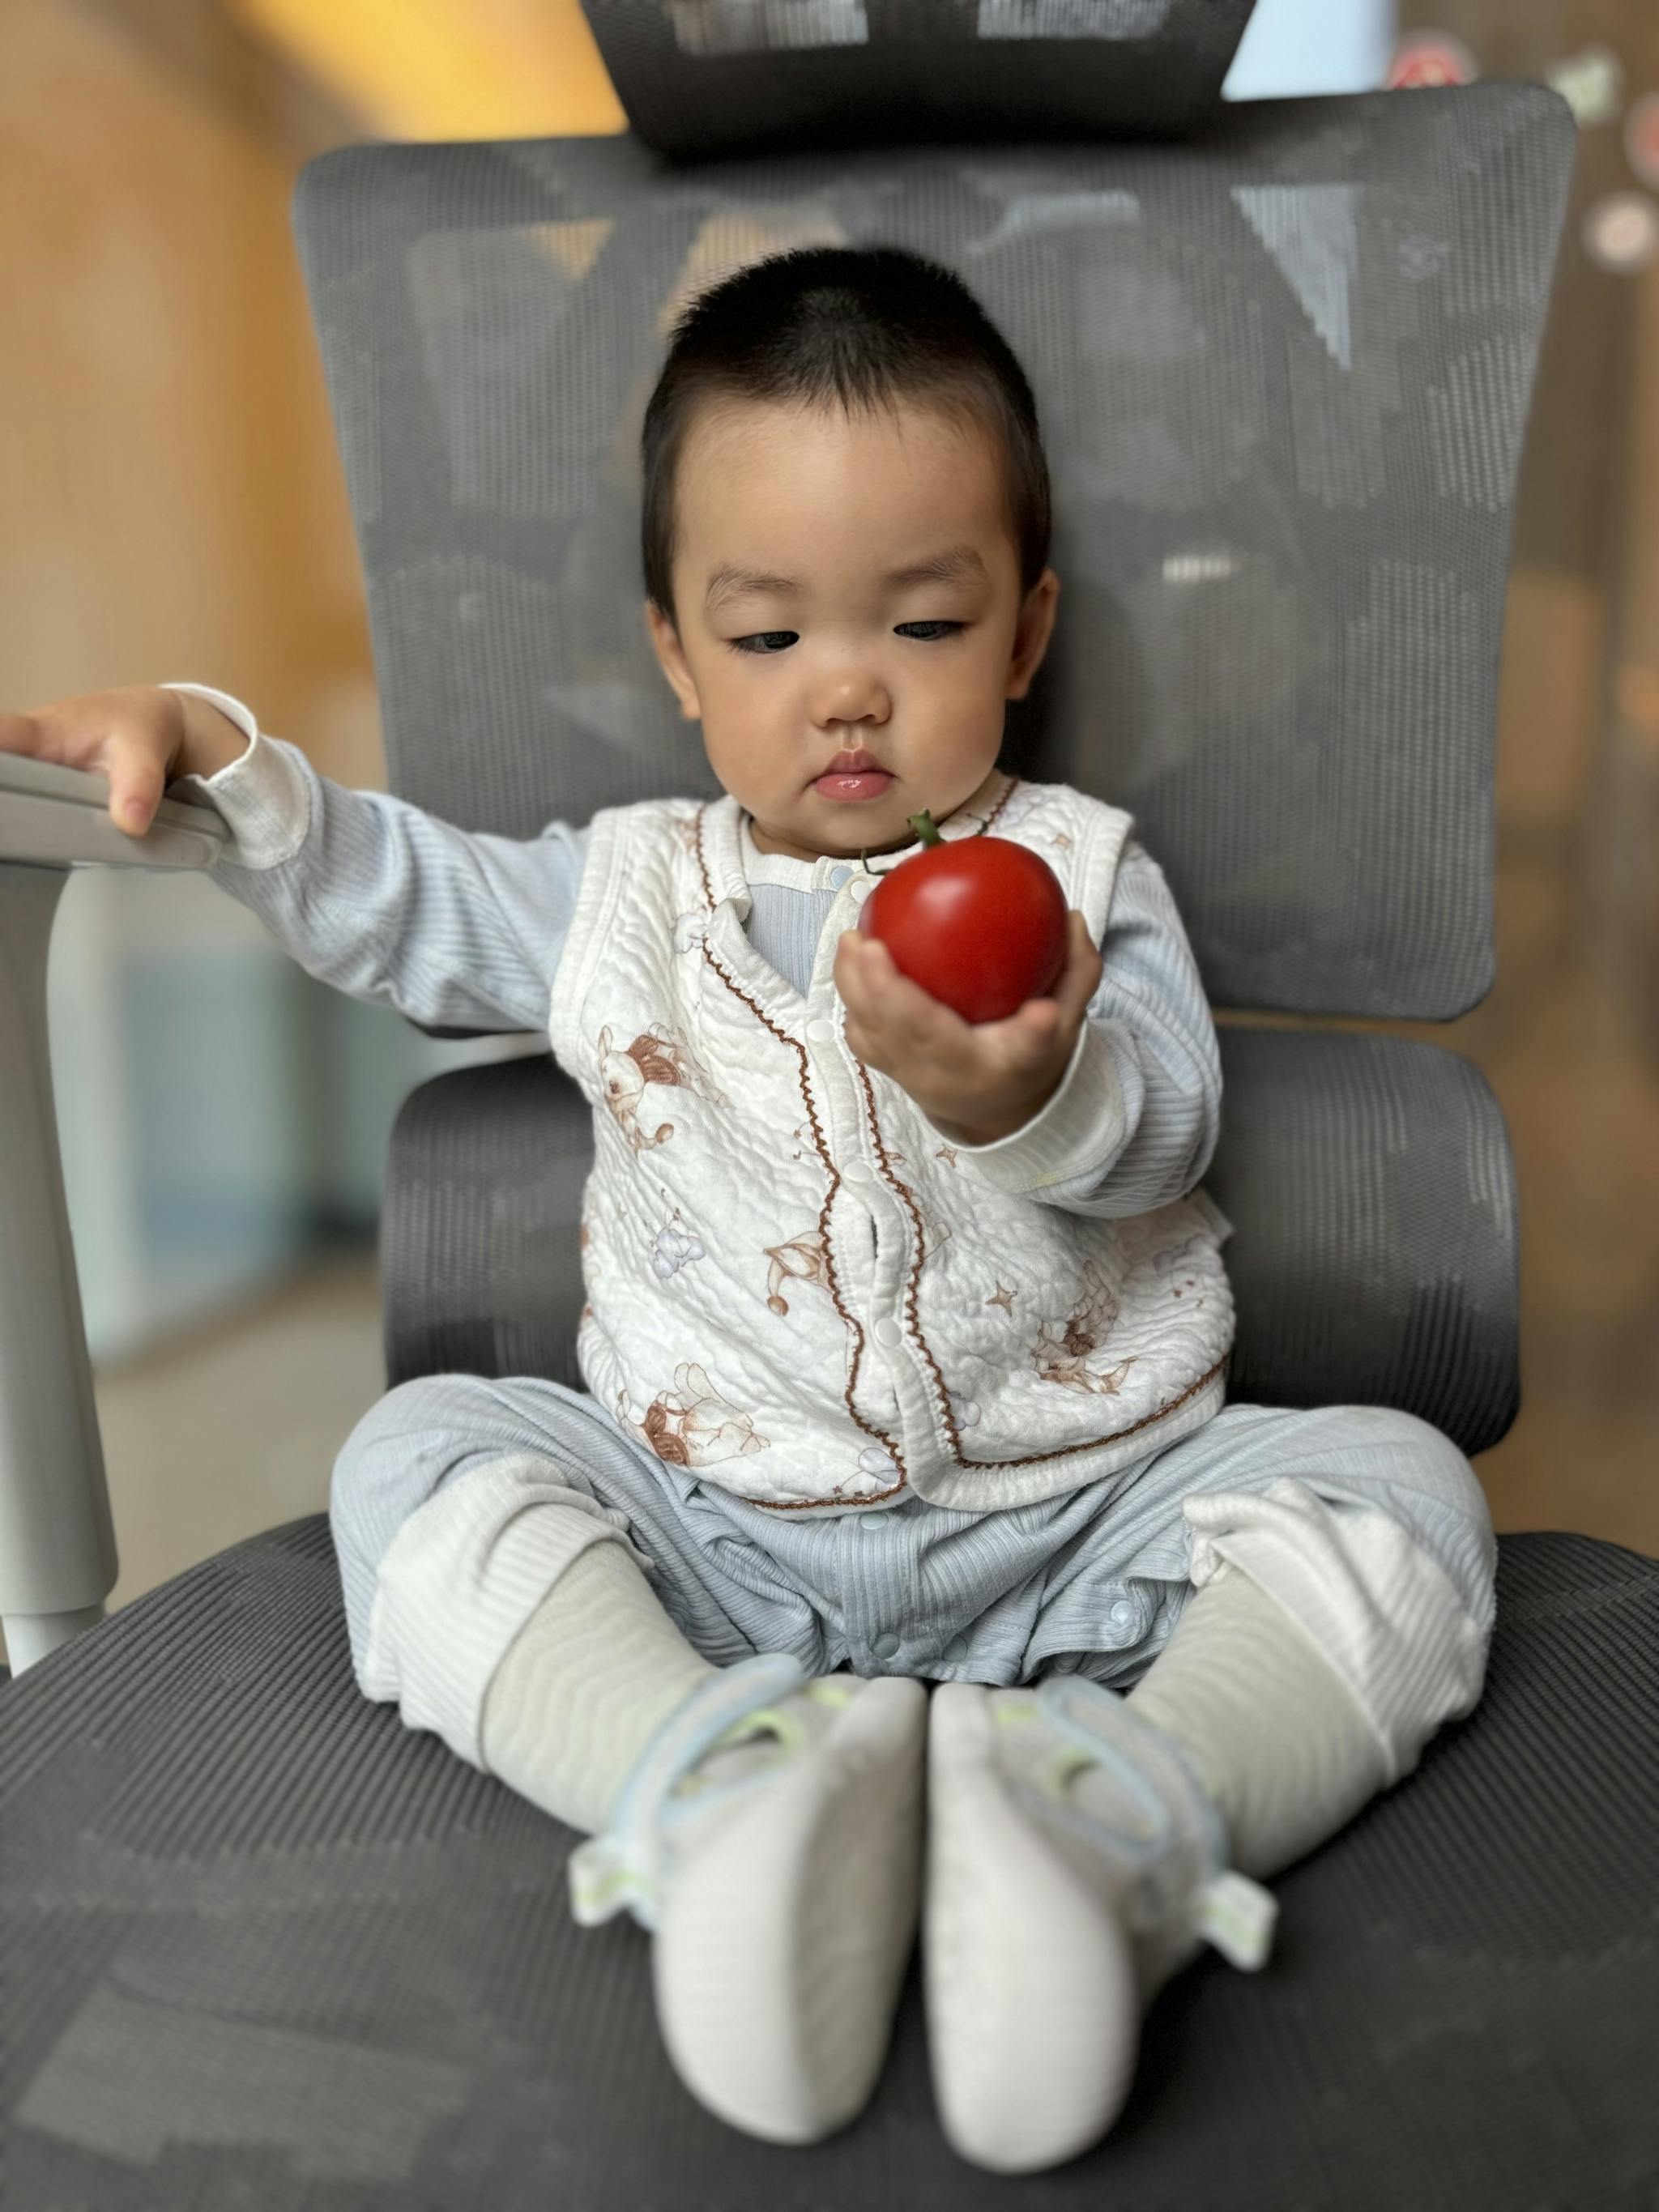 A young child sitting cross-legged on a chair extends their arm holding a red ball, with a focused expression on their face